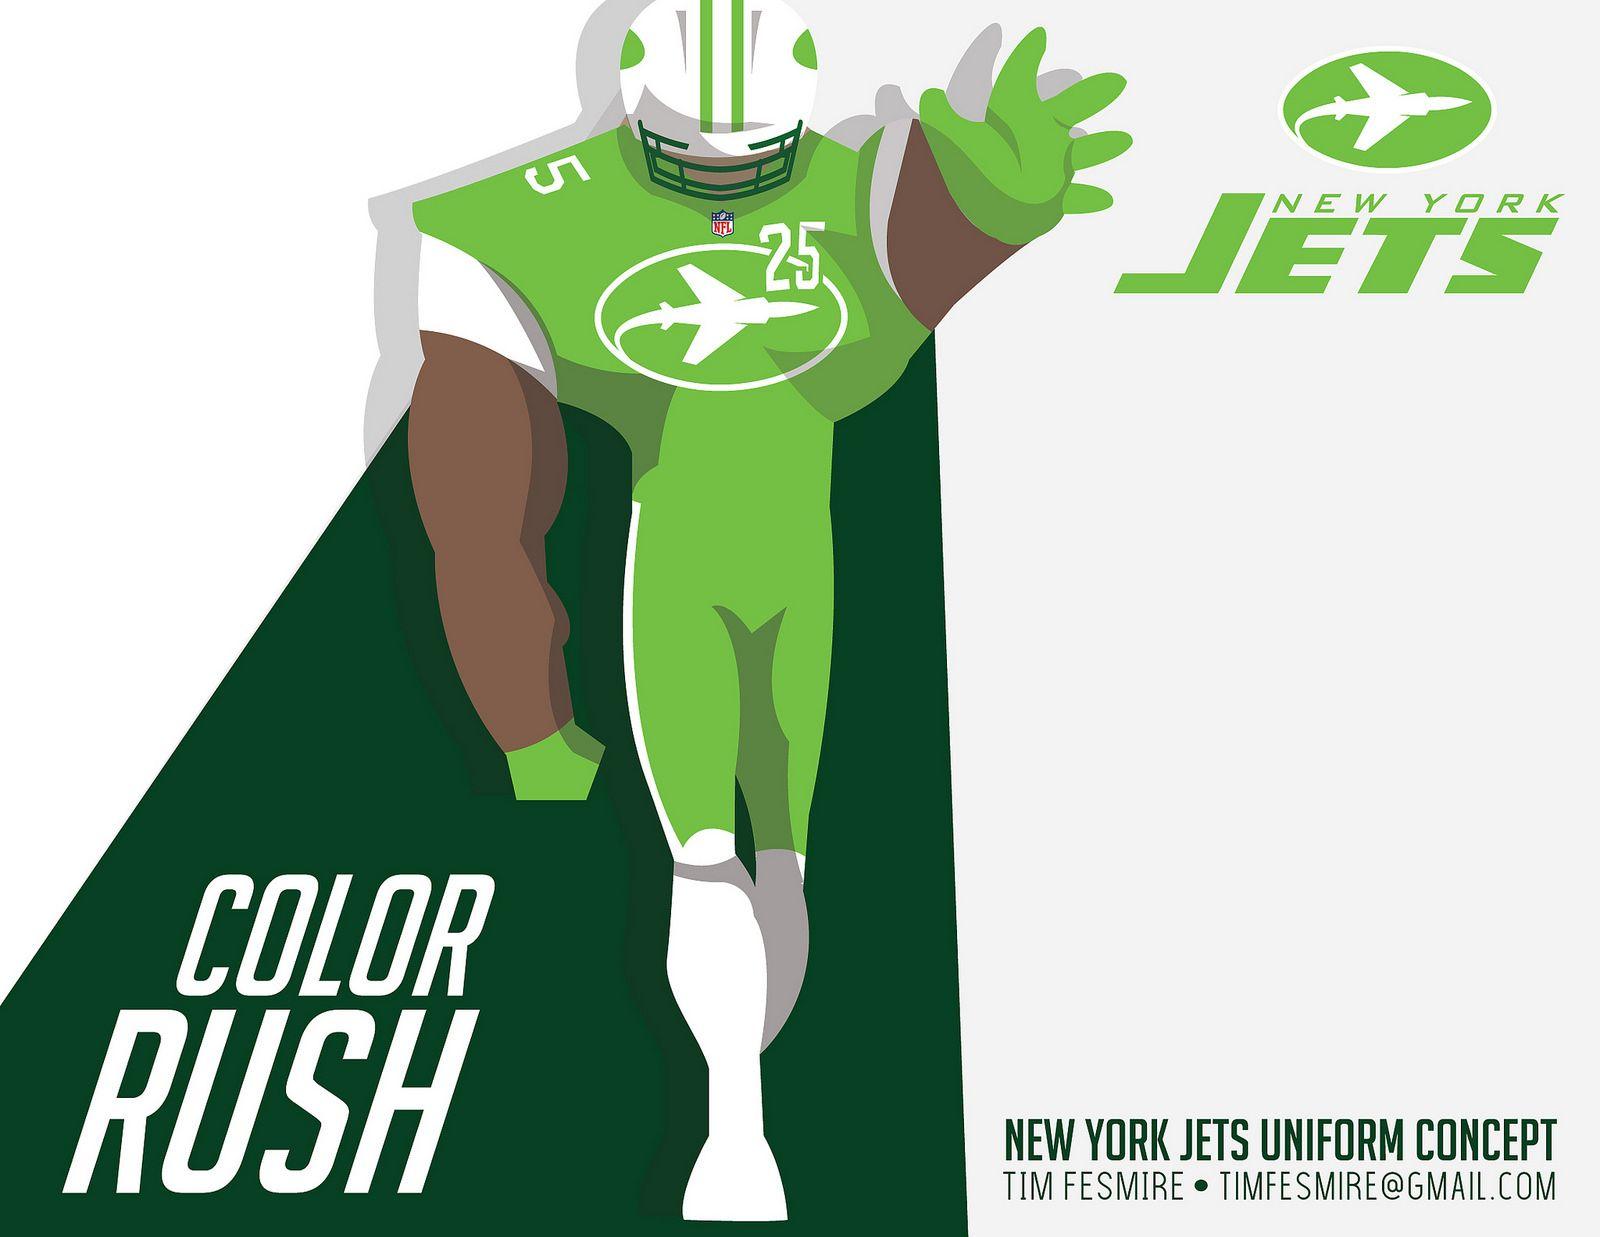 New York Jets New Logo - Uni Watch delivers the winning entries for the New York Jets ...